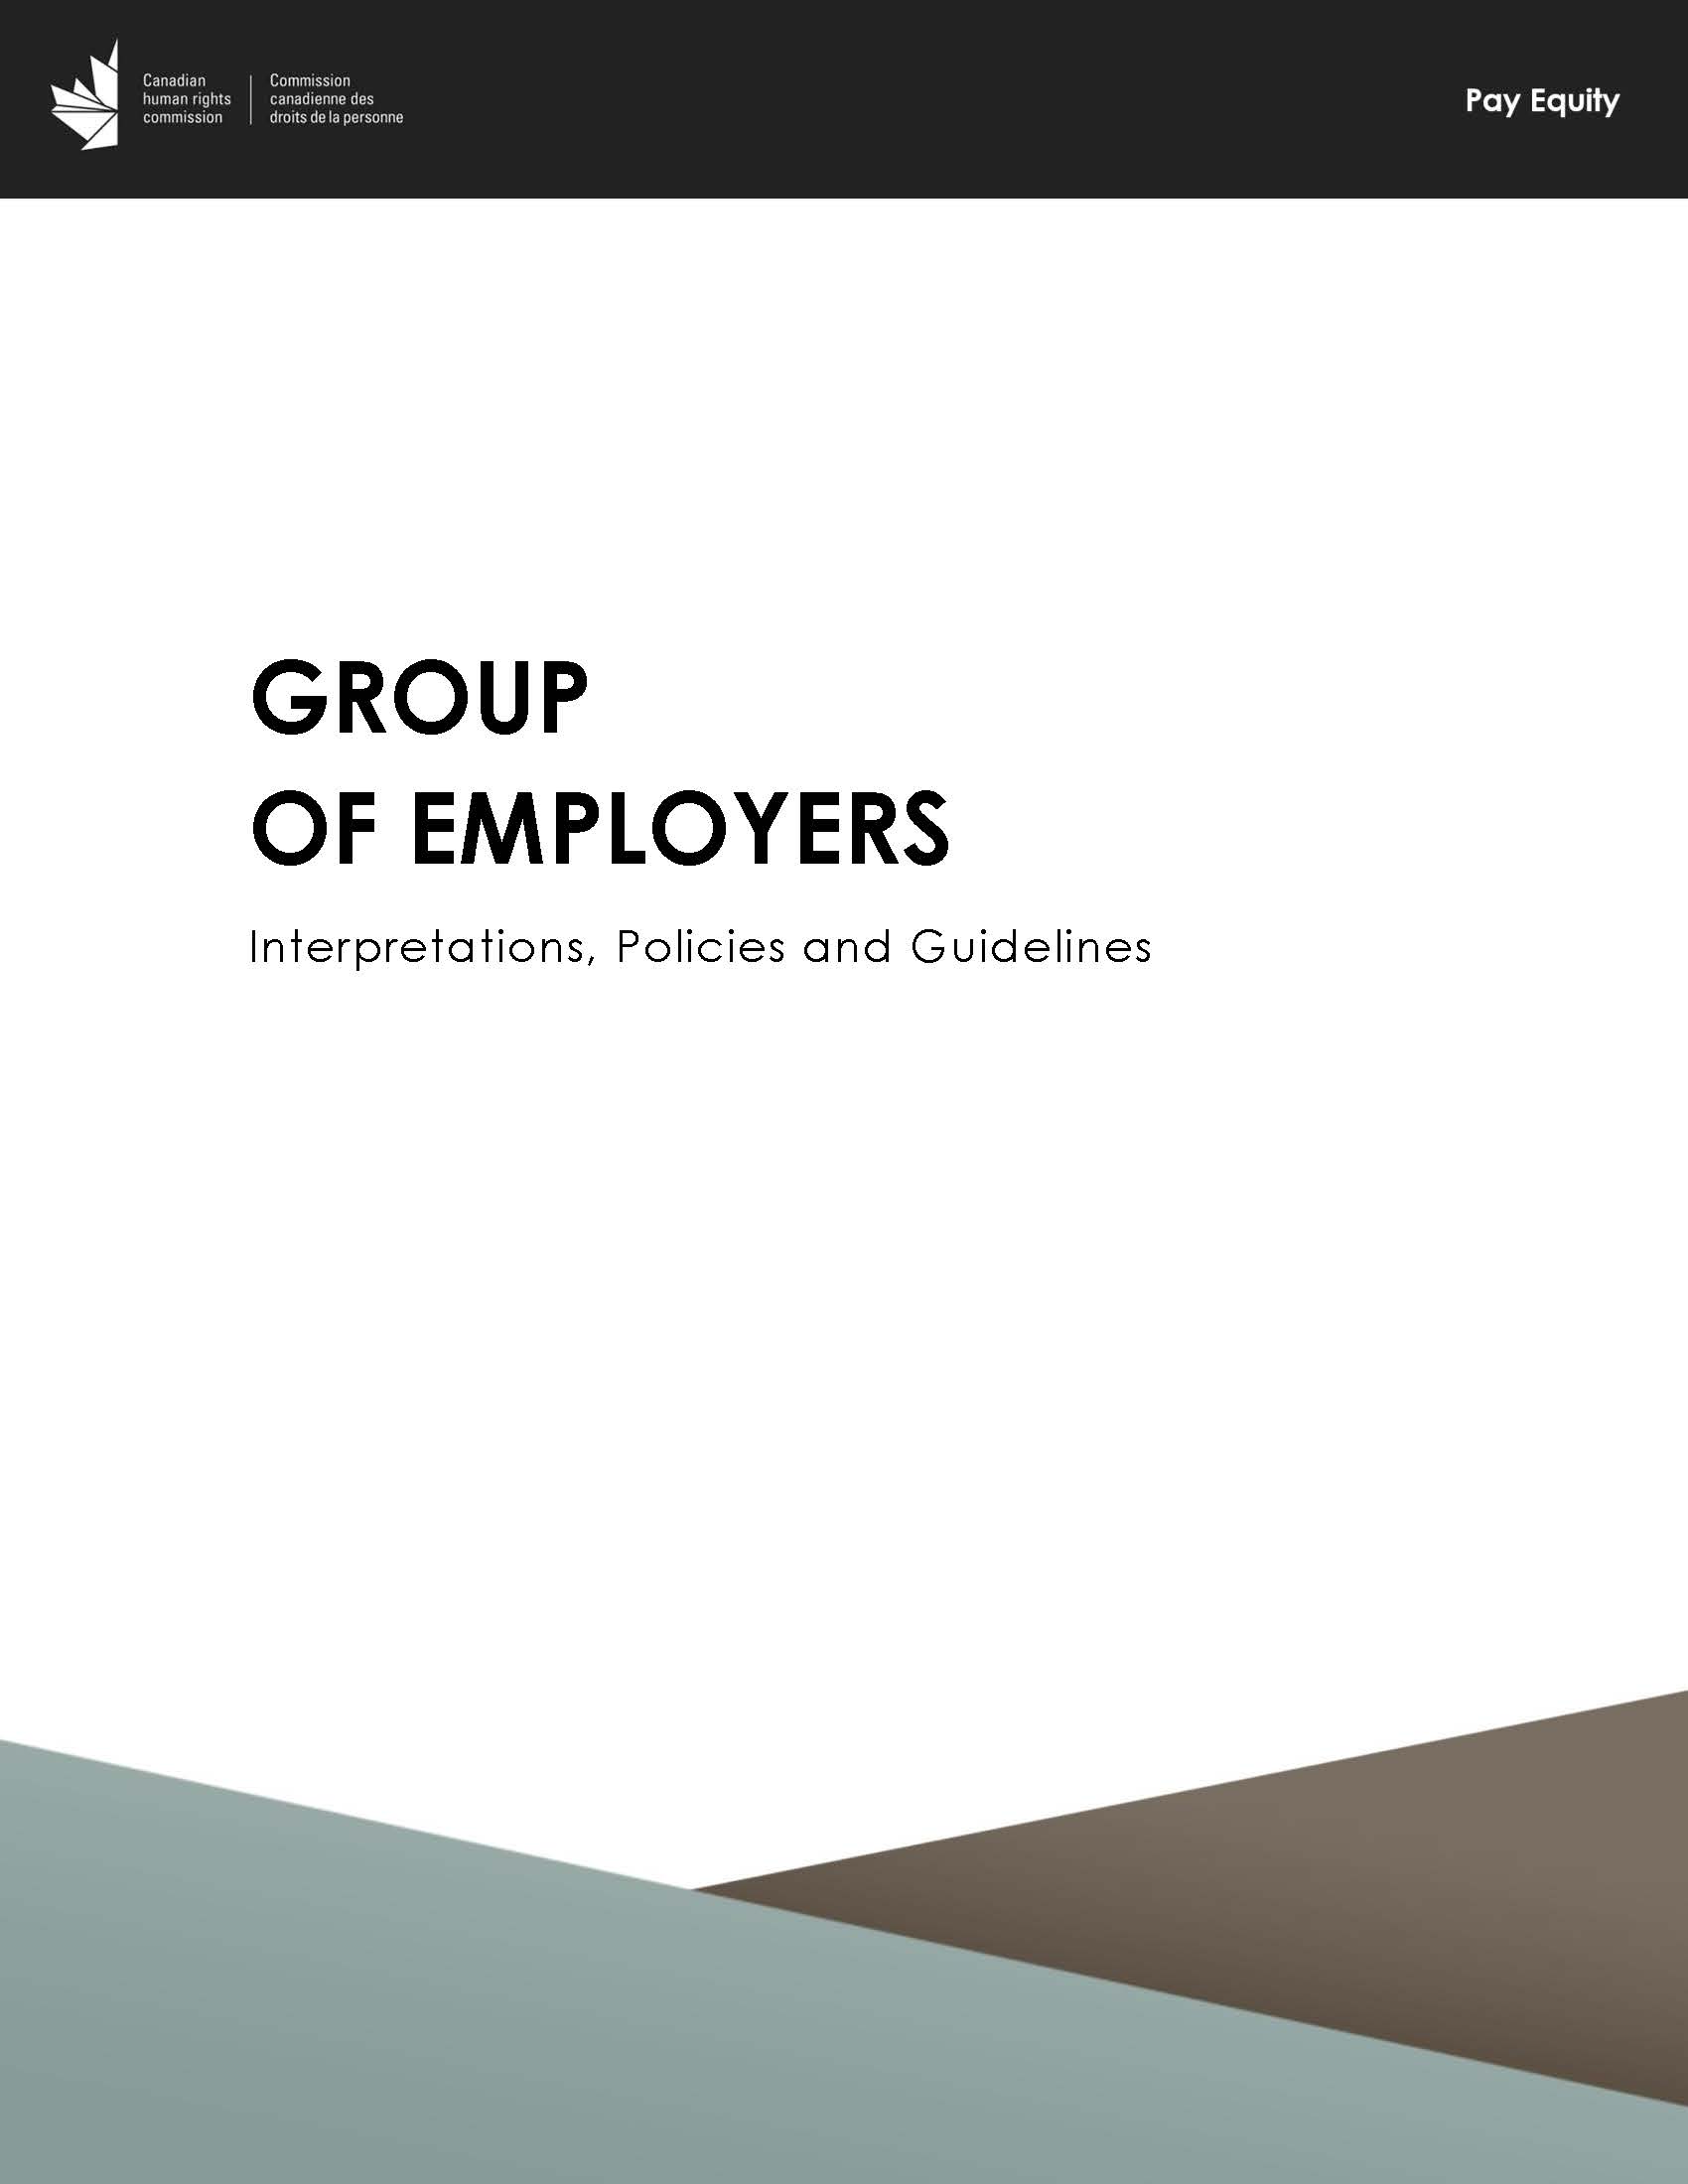 Group of Employers - Interpretations, Policies and Guidelines